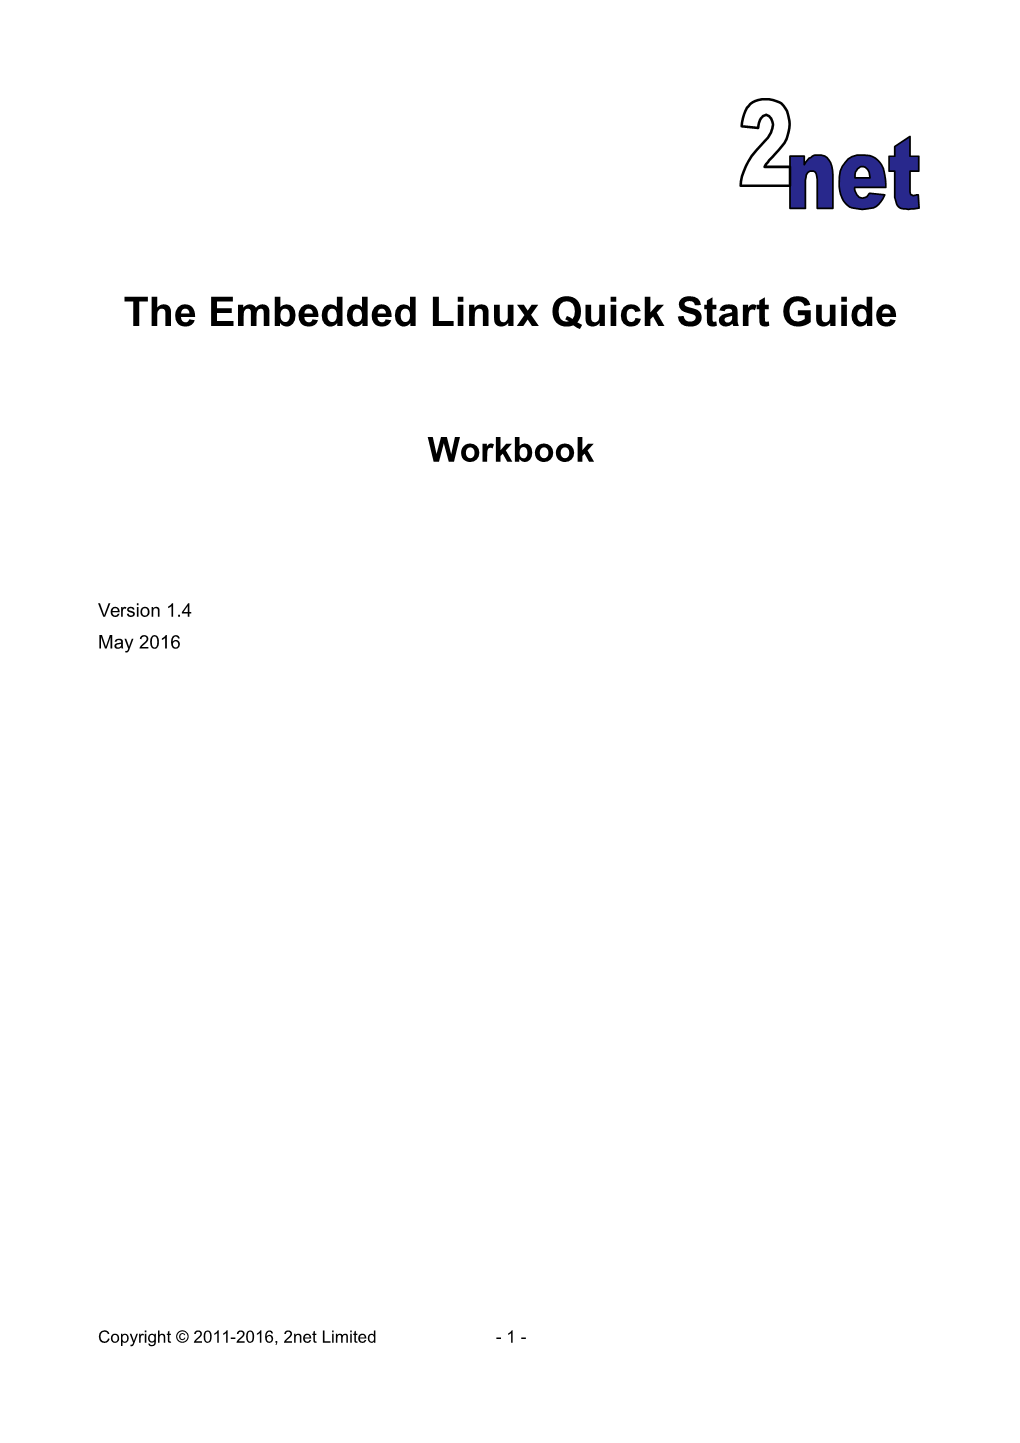 The Embedded Linux Quick Start Guide